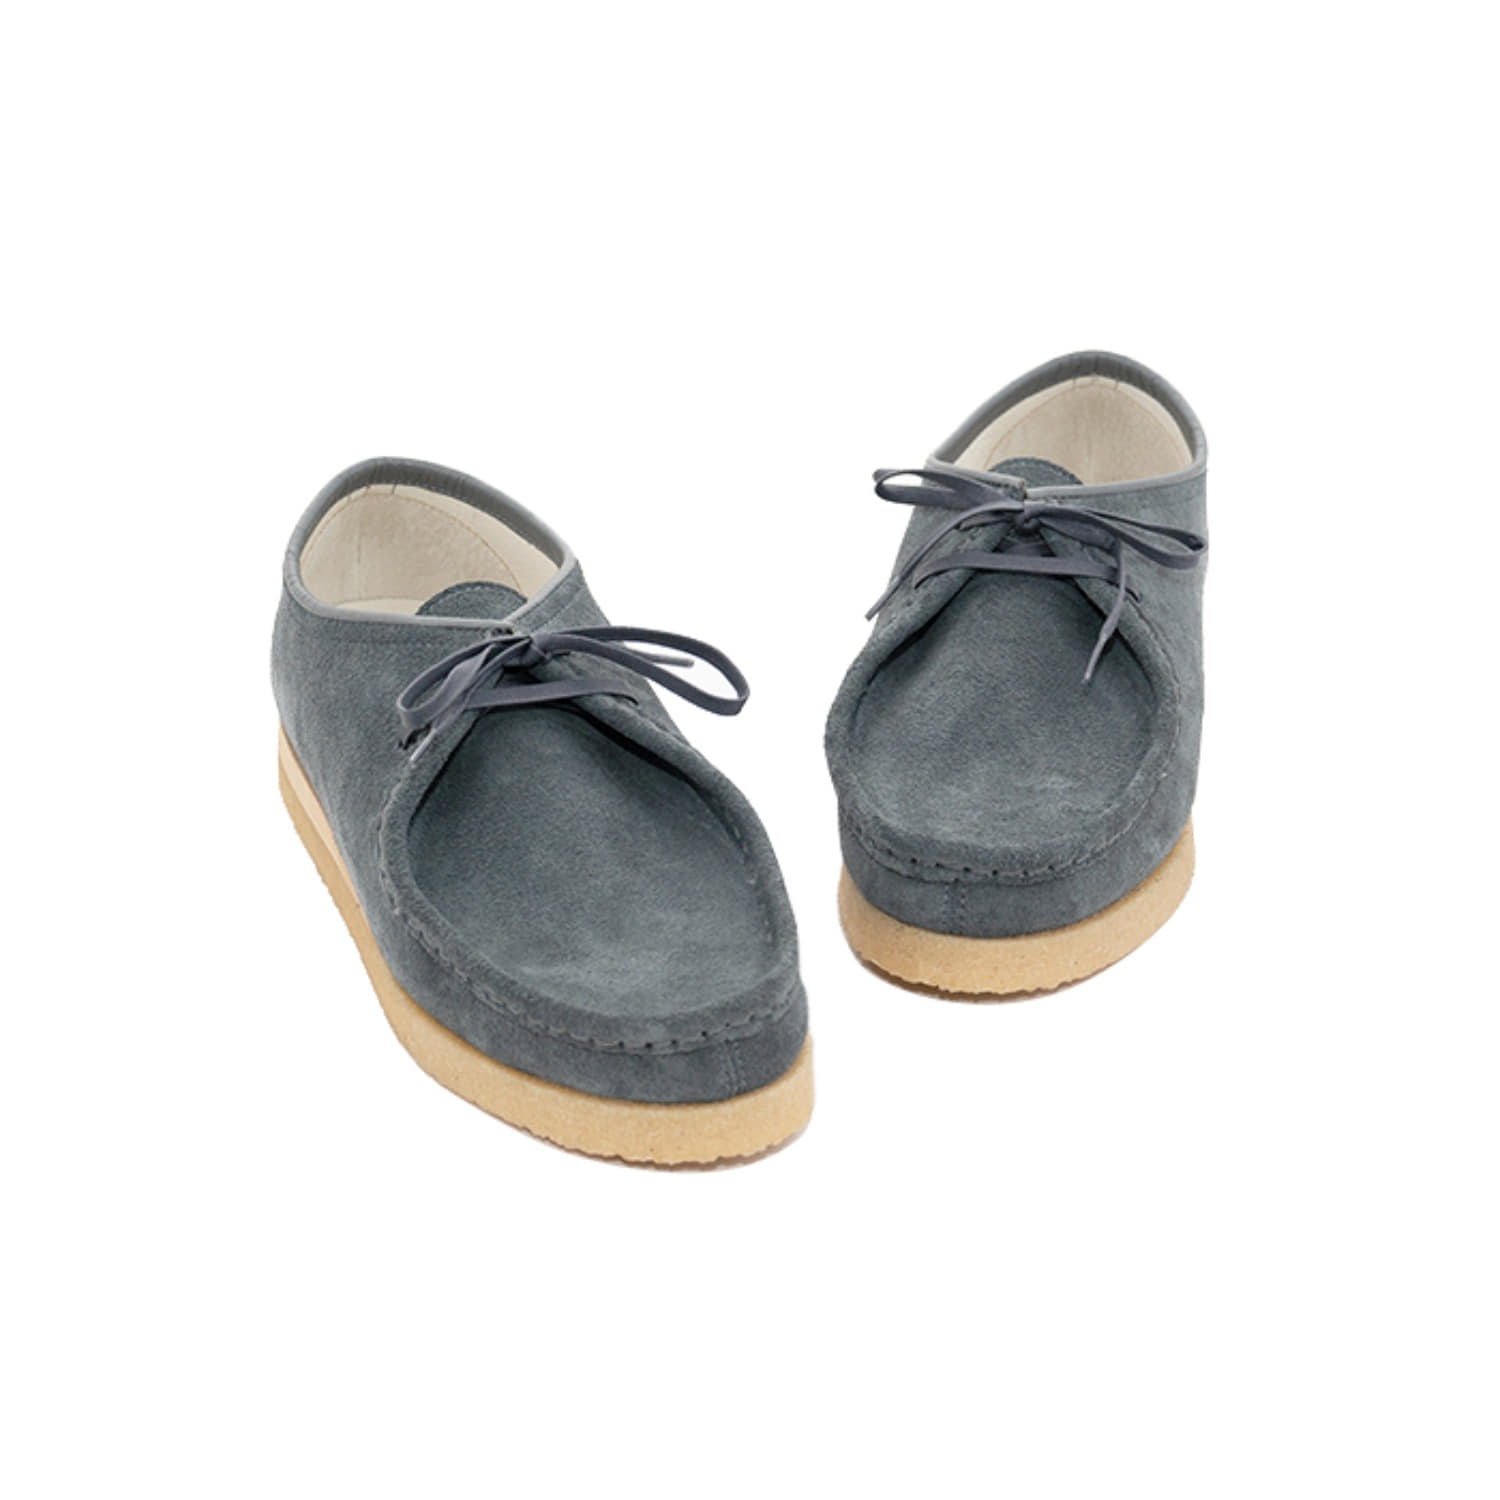 moccasin shoes (suede) blue grey